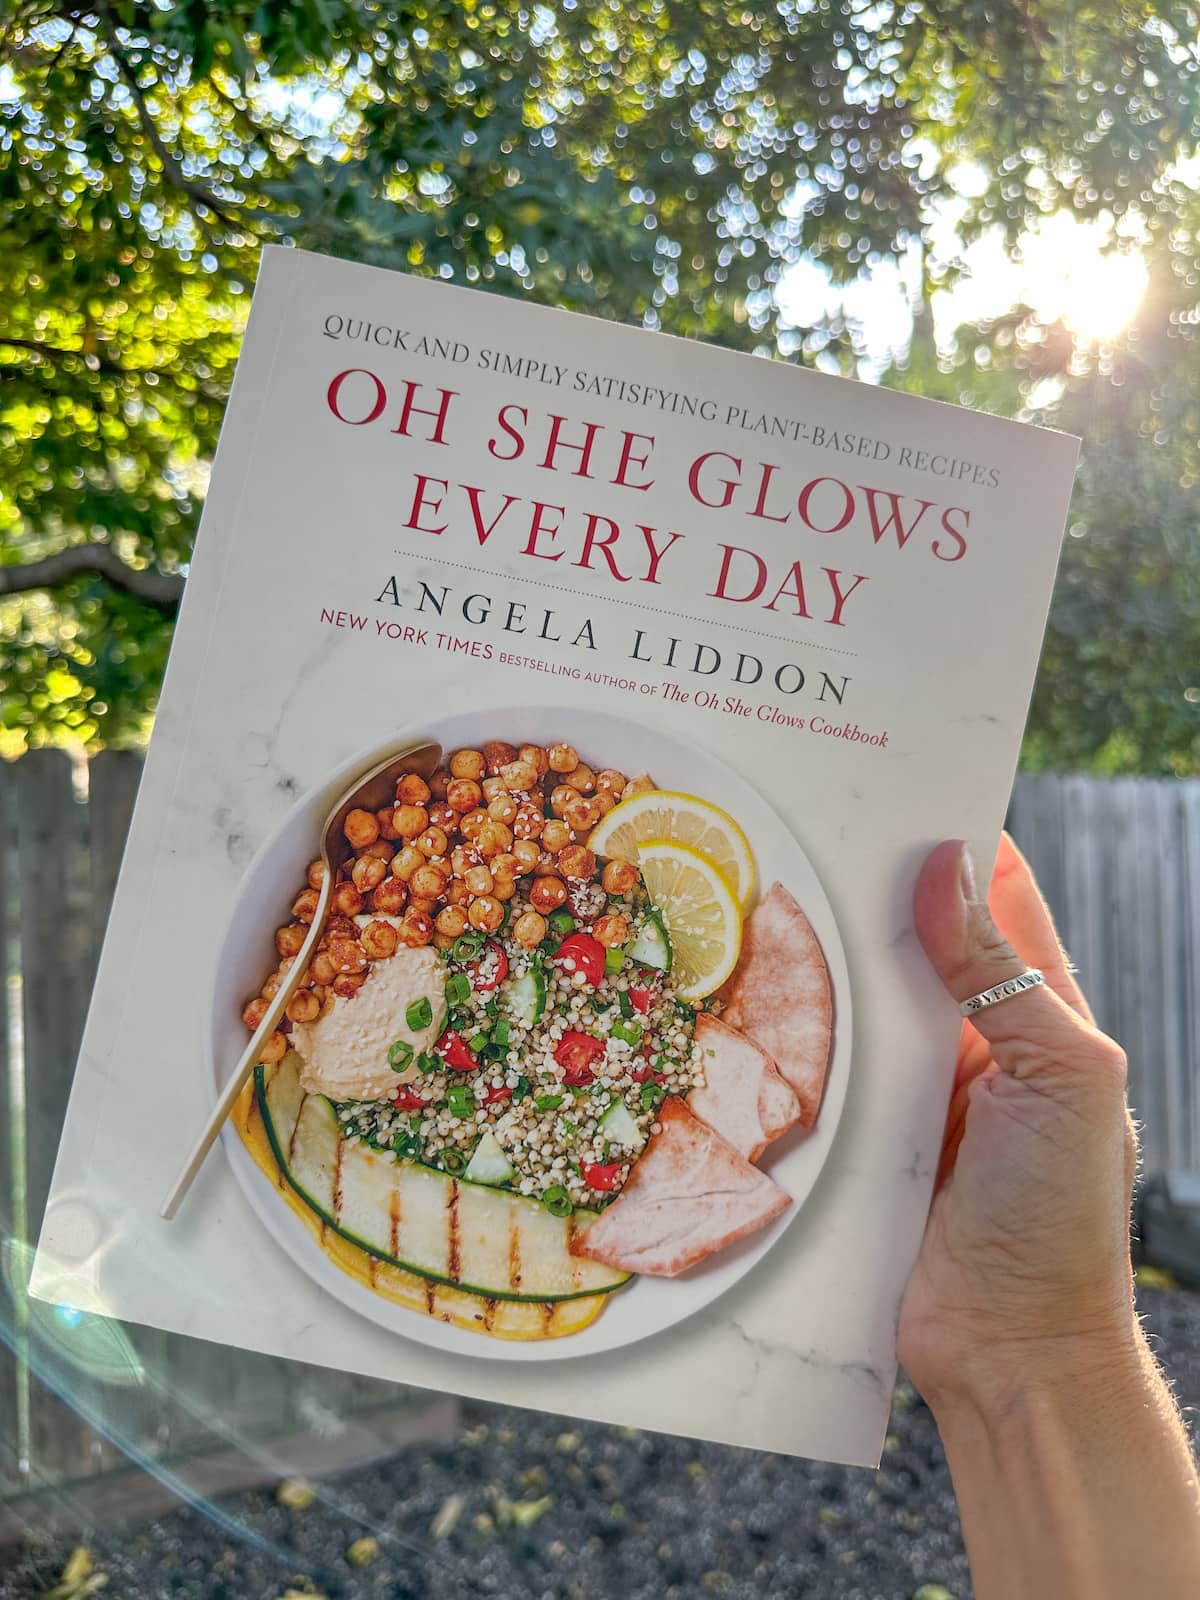 Cover art for Oh She Glows Every Day by Angela Liddon.